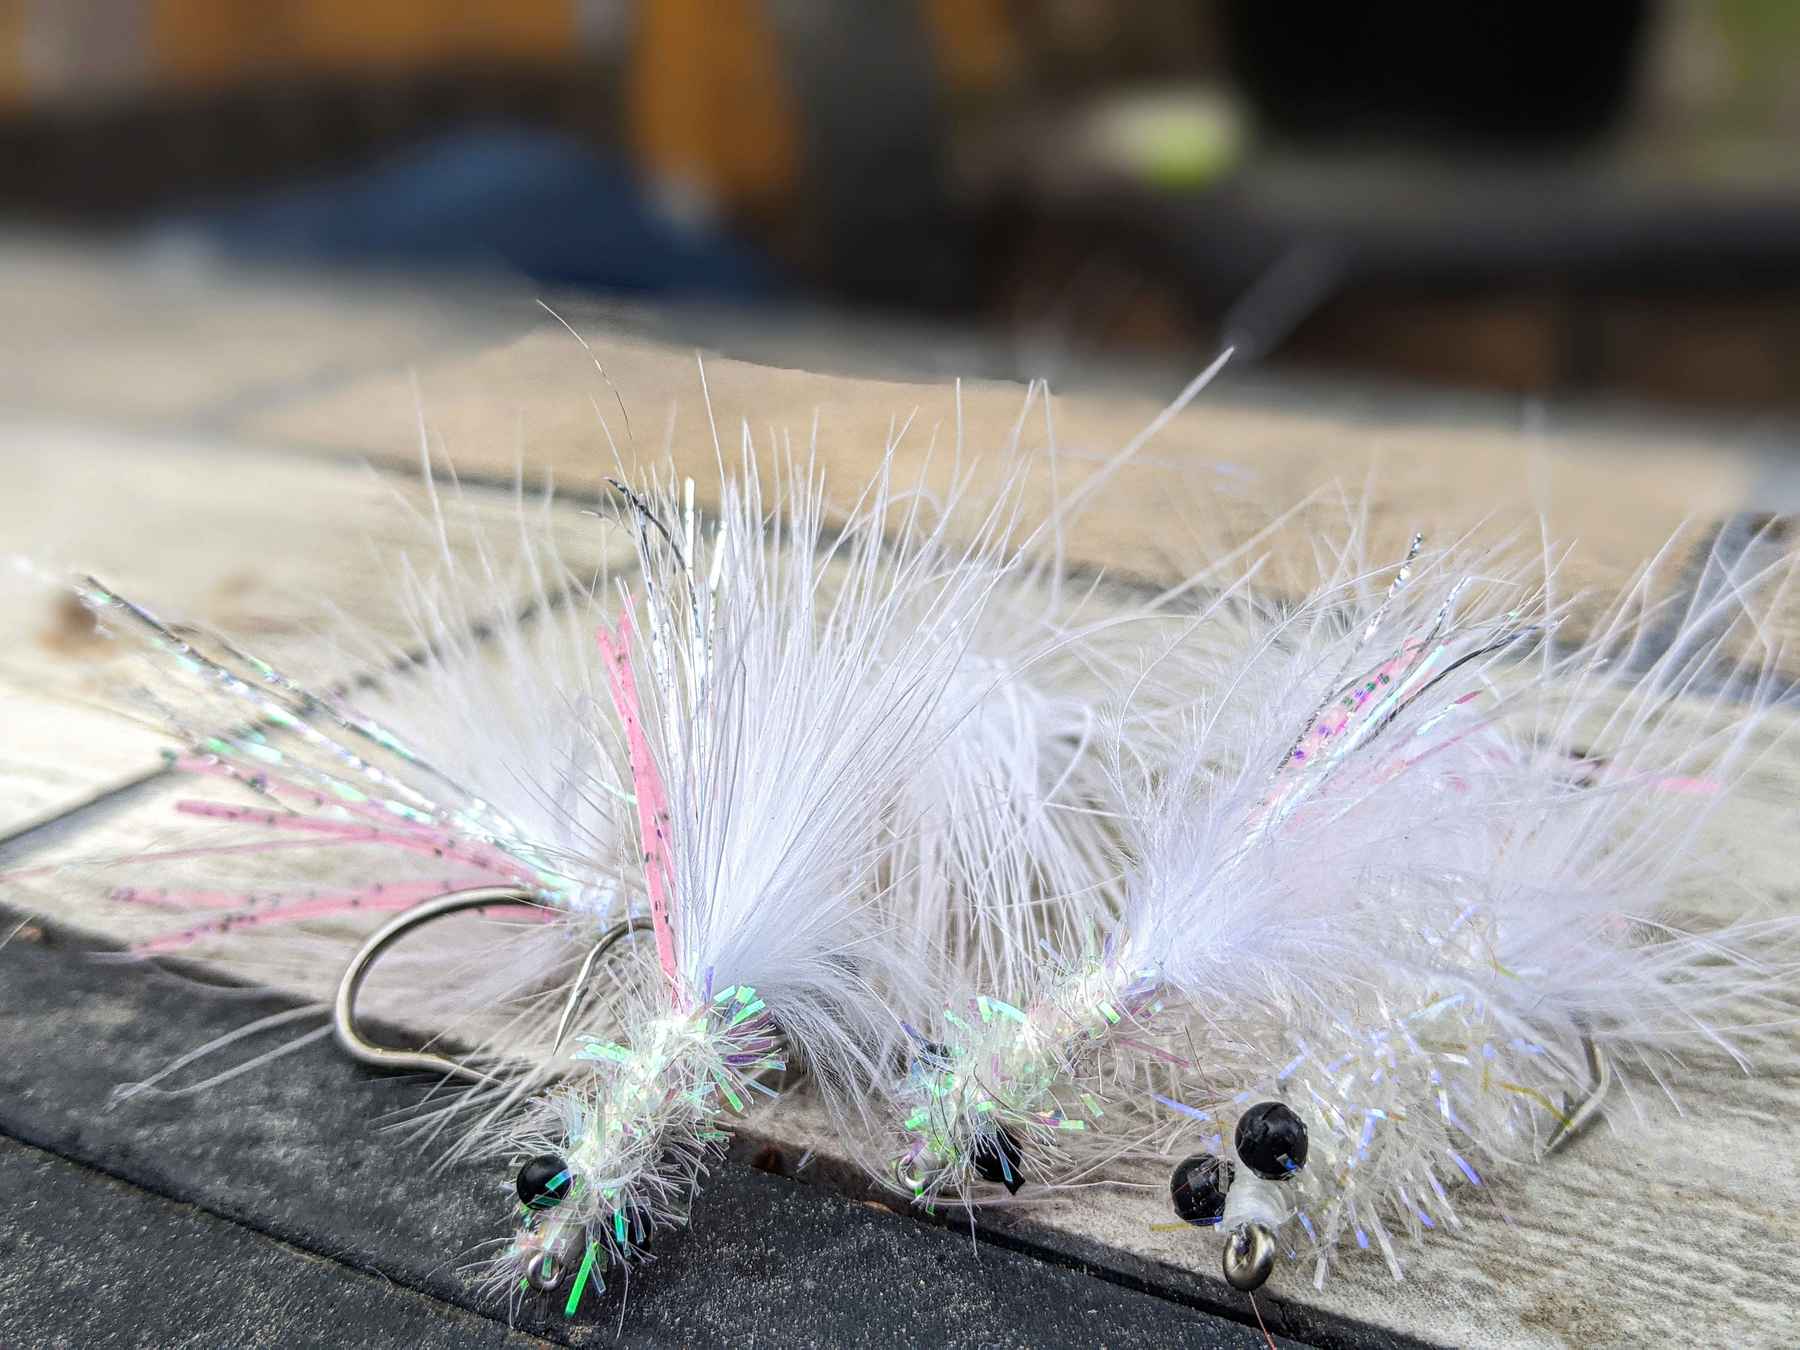 The Schminnow: 'The only fly you need